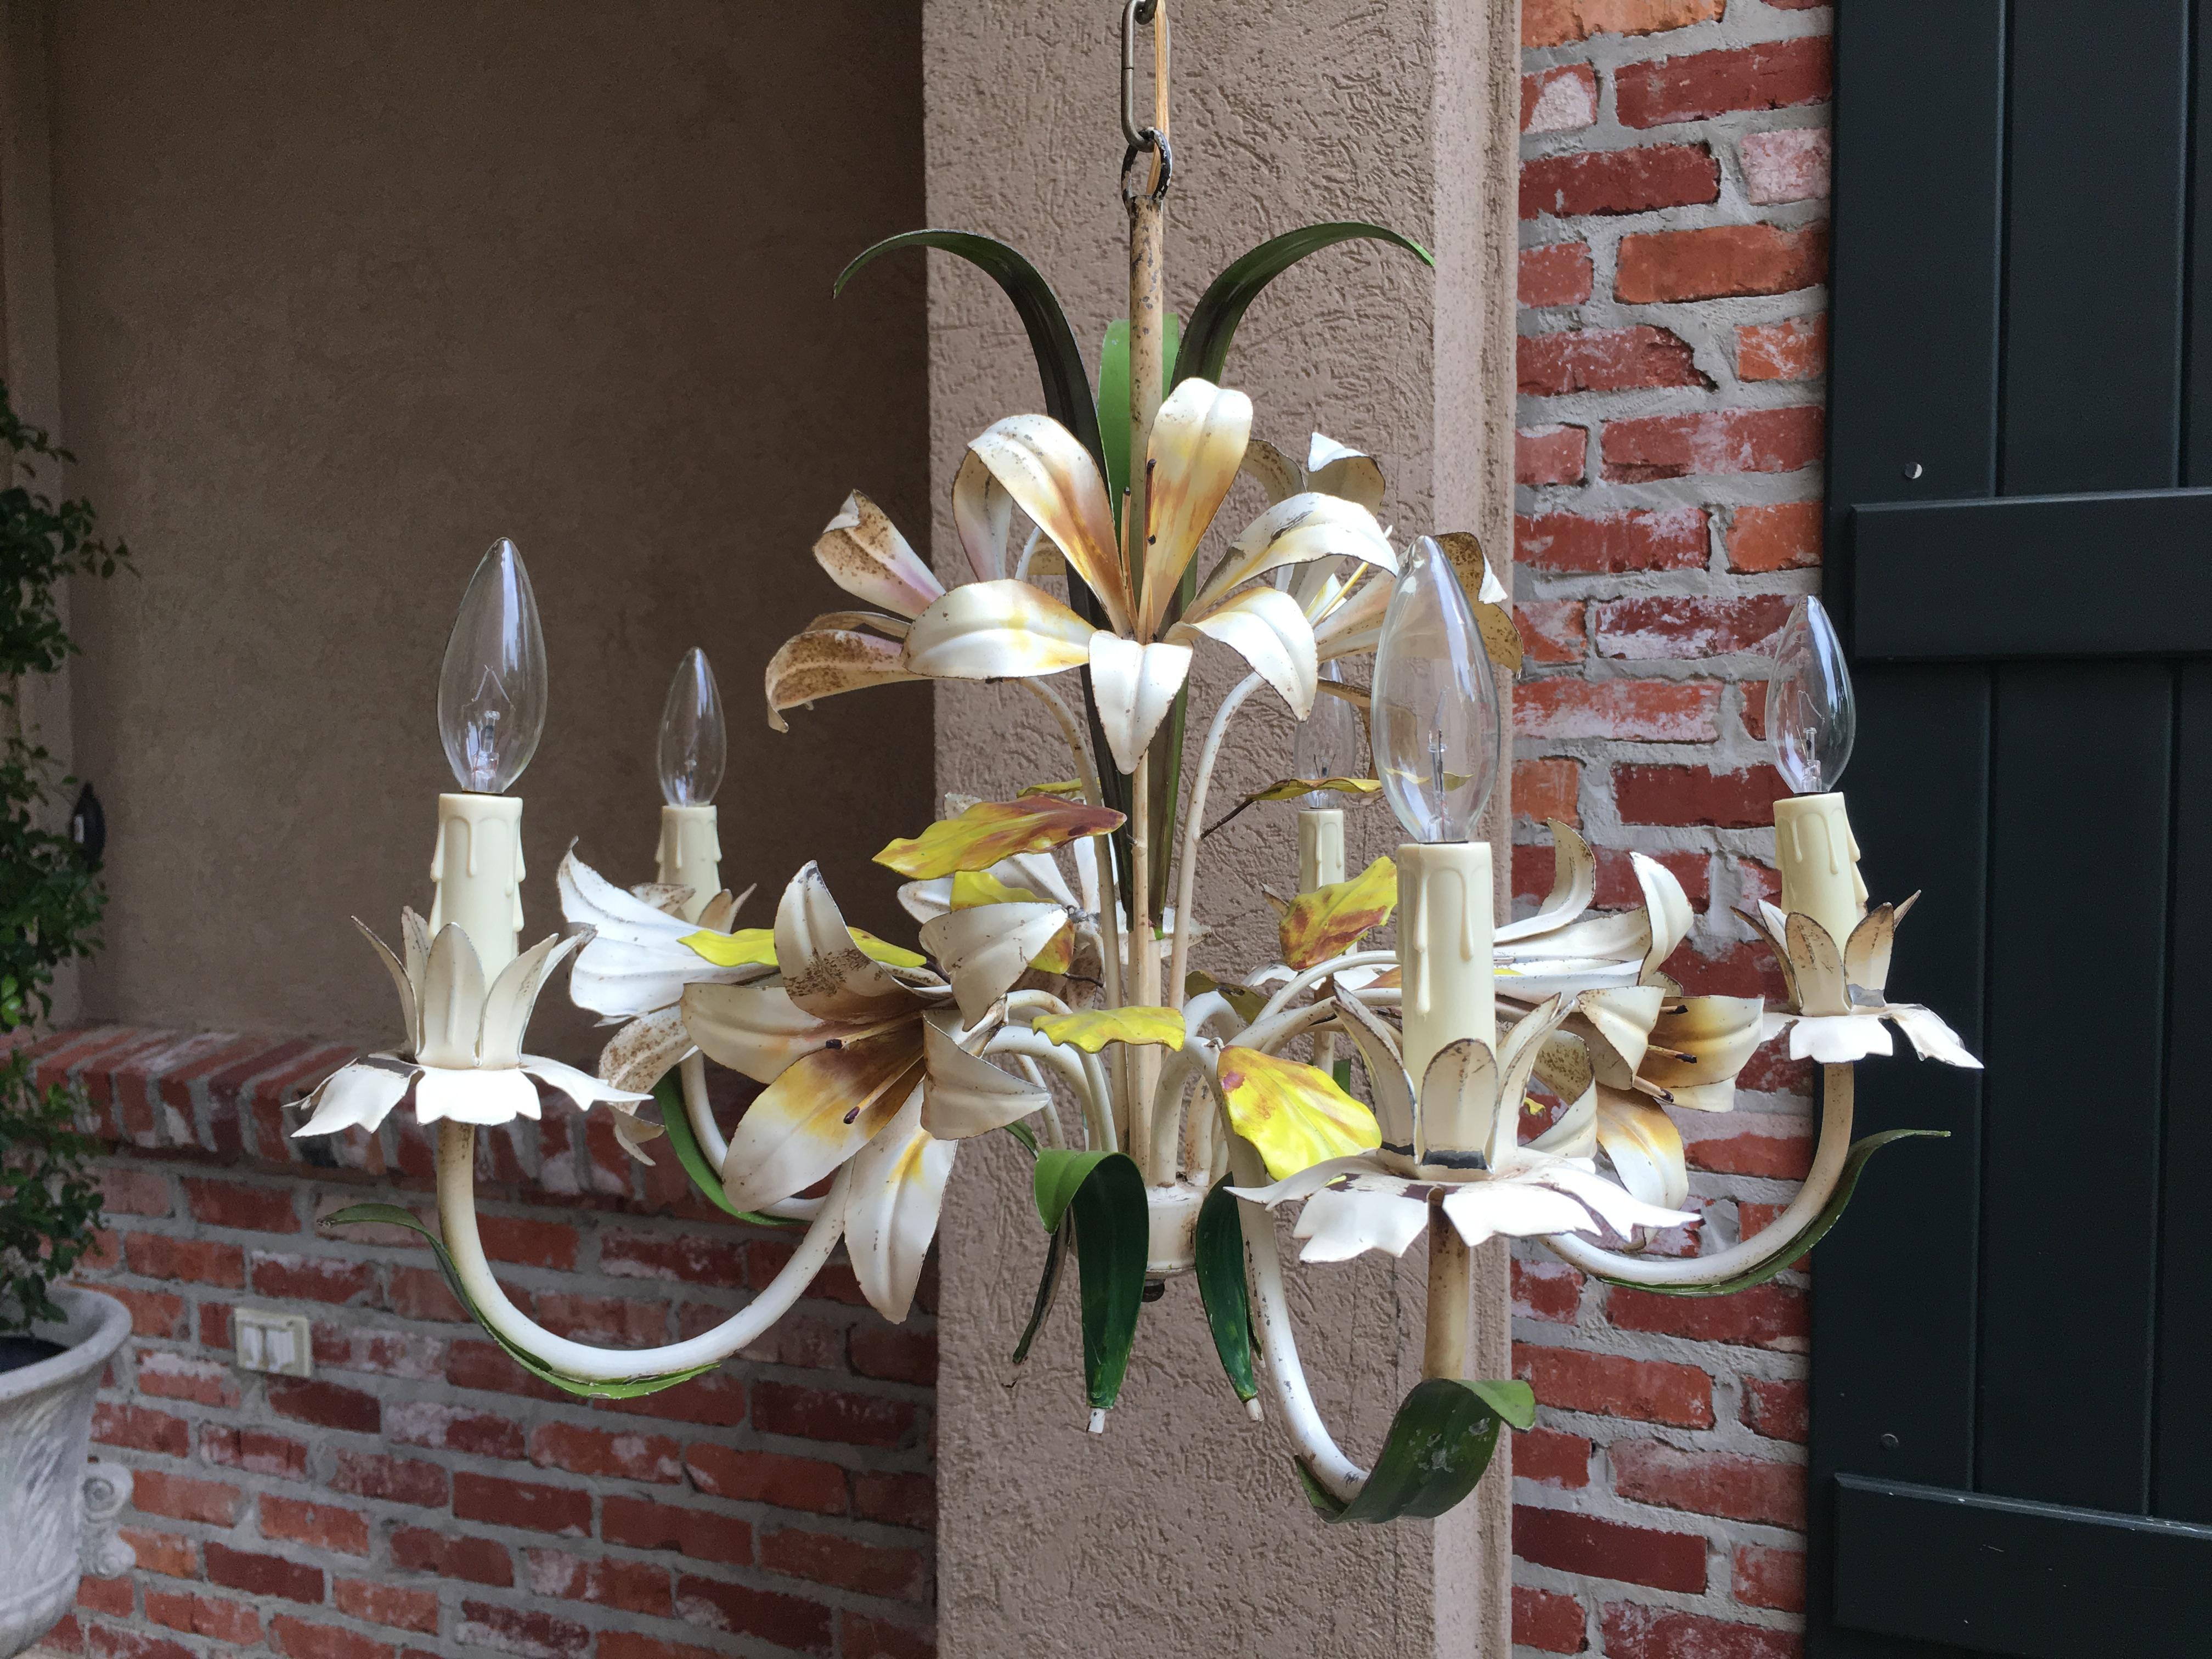 ~Direct from France, another gorgeous antique French chandelier from our most recent container, and look at the stunning color and the extraordinary details!~
~Yellow, brown, off white on the flowers and green foliage, all remaining very vibrant